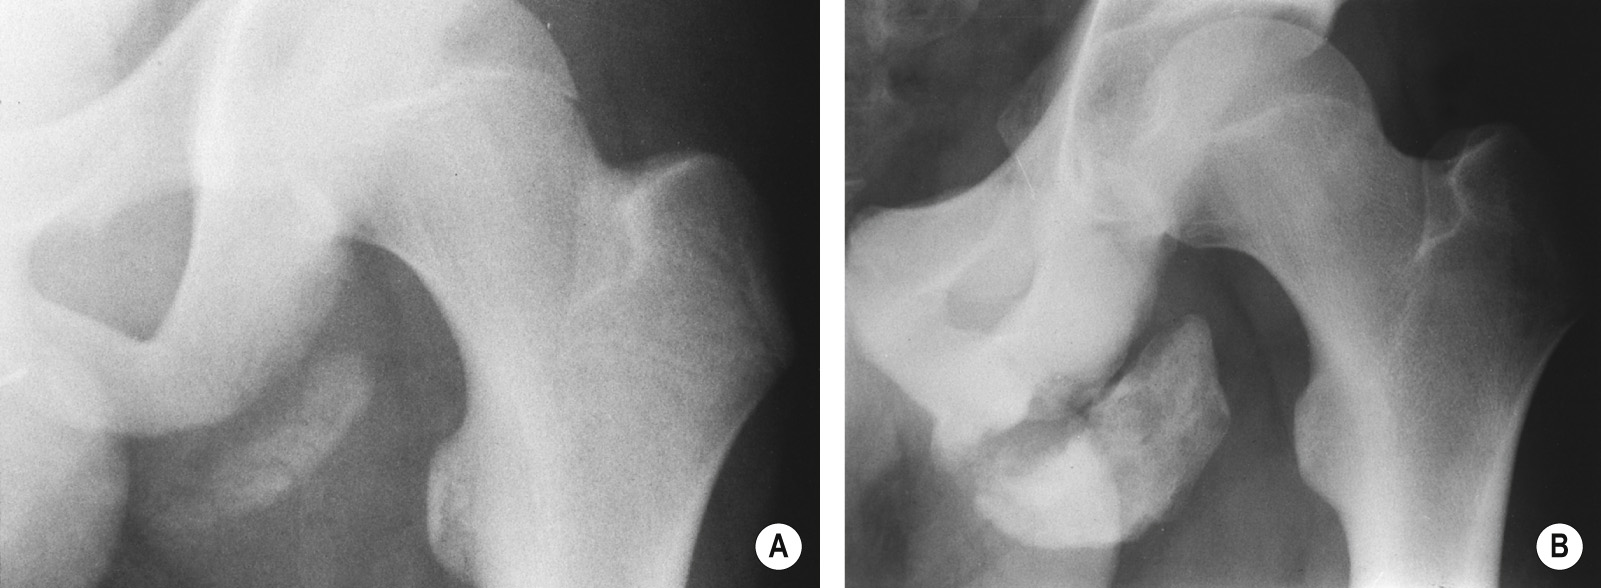 Ischial avulsion. (A) XR at presentation shows the avulsed ischial apophysis. (B) Three years later the apophysis has continued to grow to form a large ossified mass. *